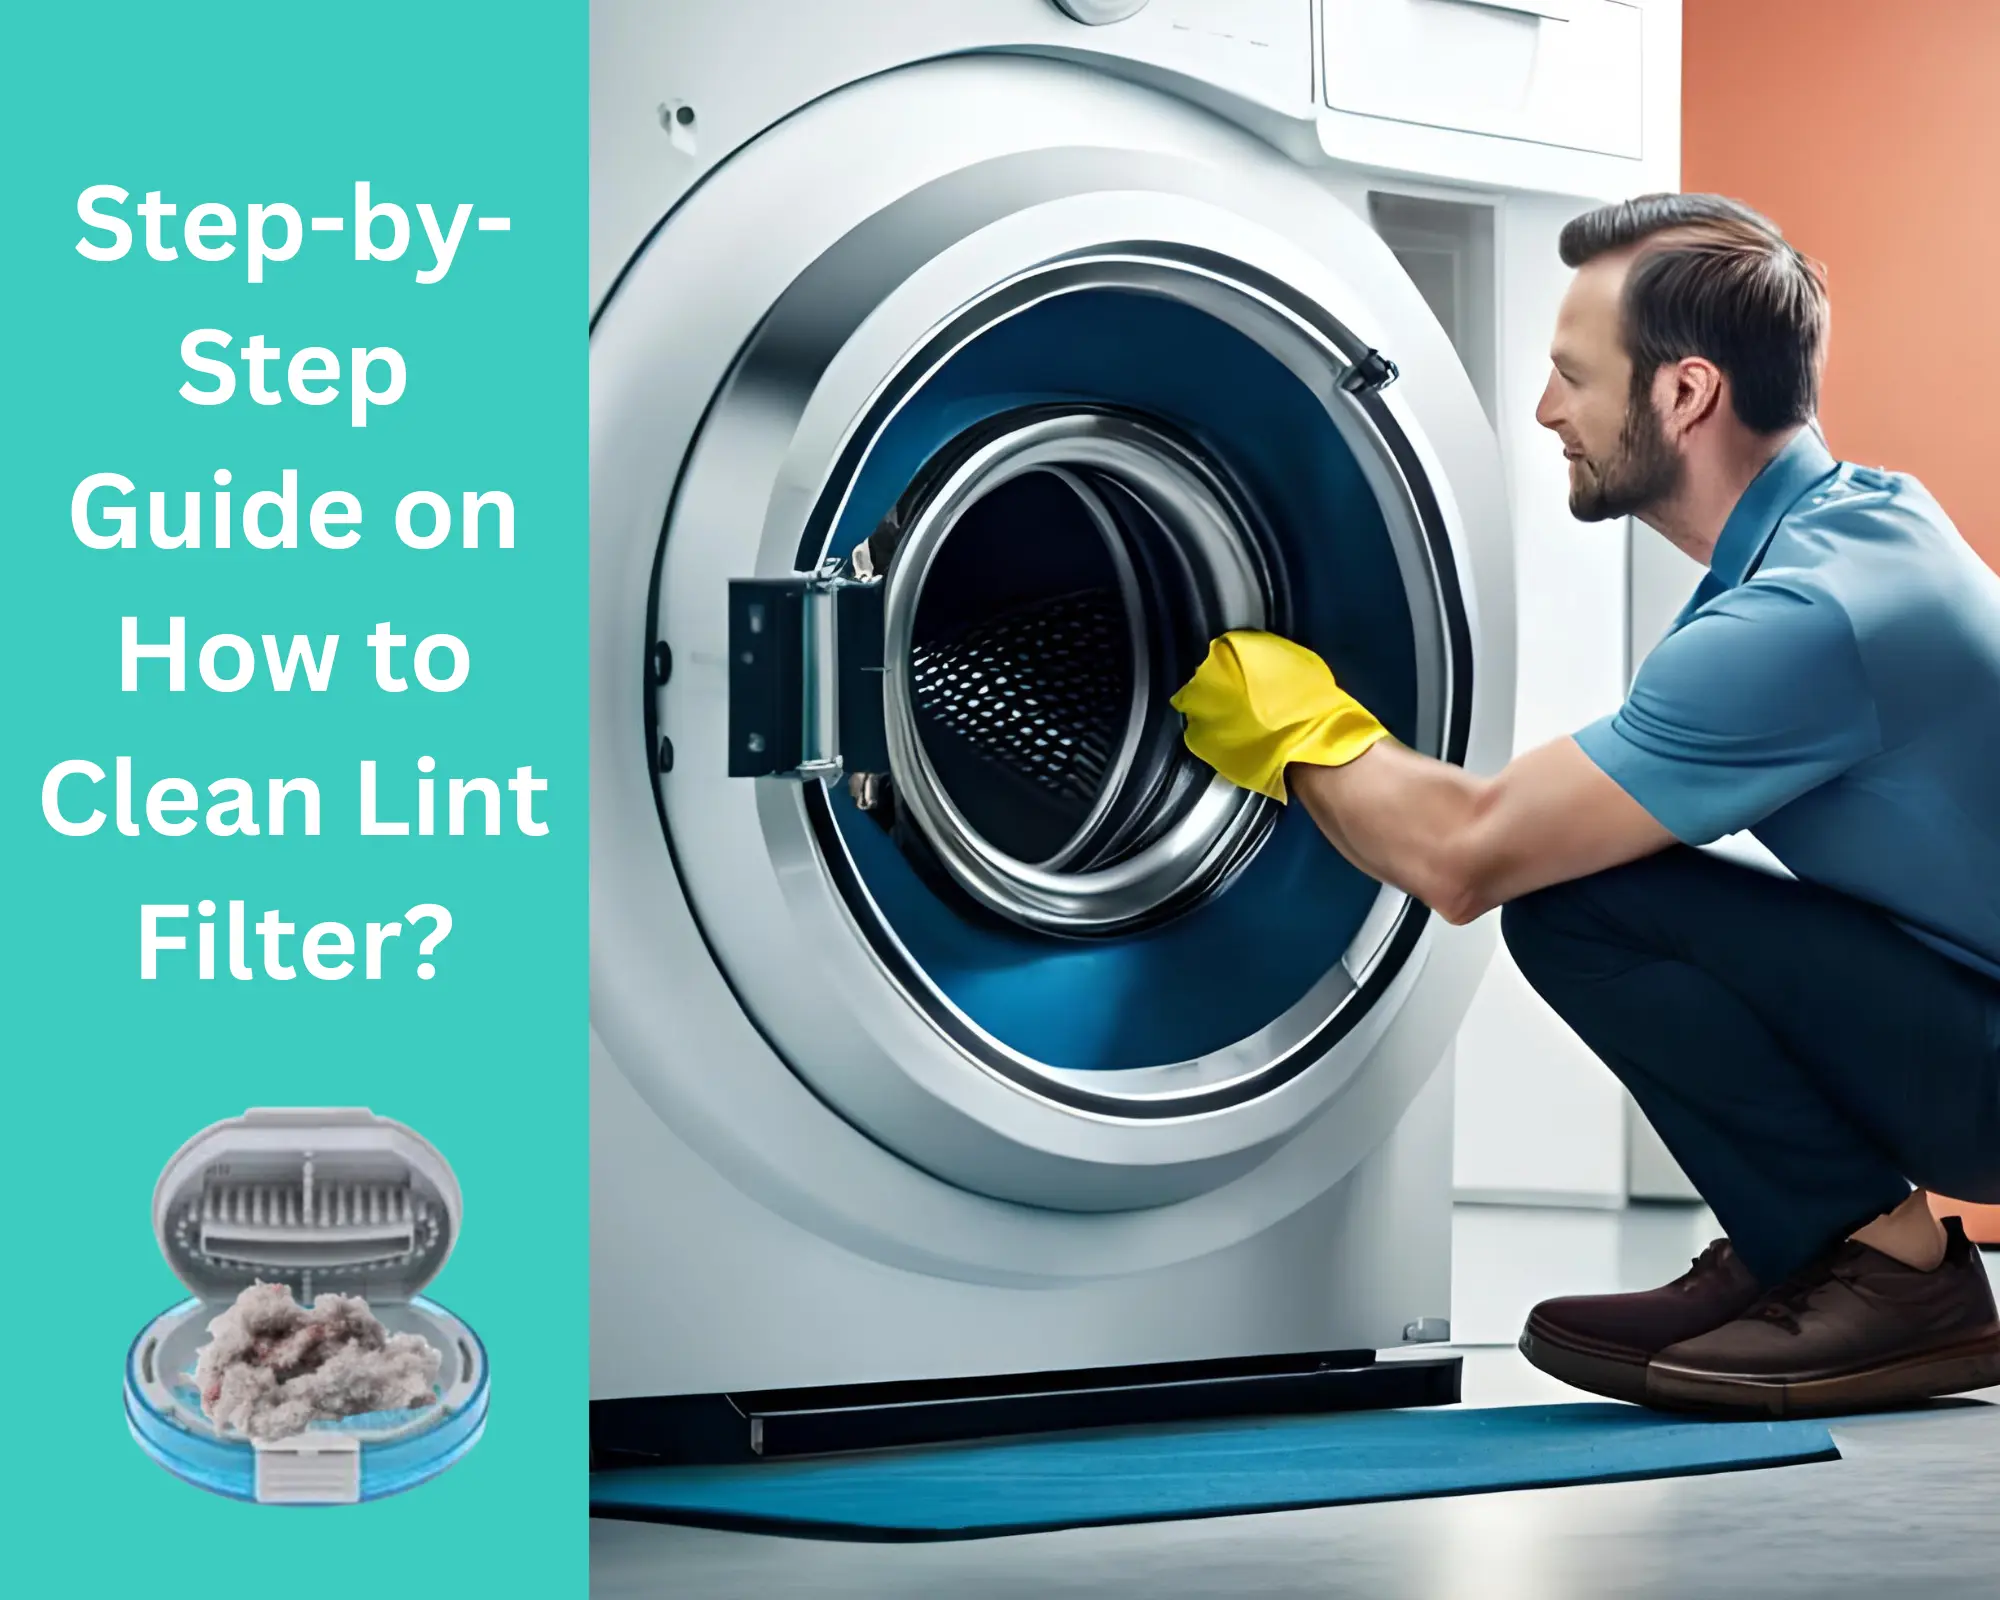 Step-by-Step Guide on How to Clean Lint Trap in washing machines